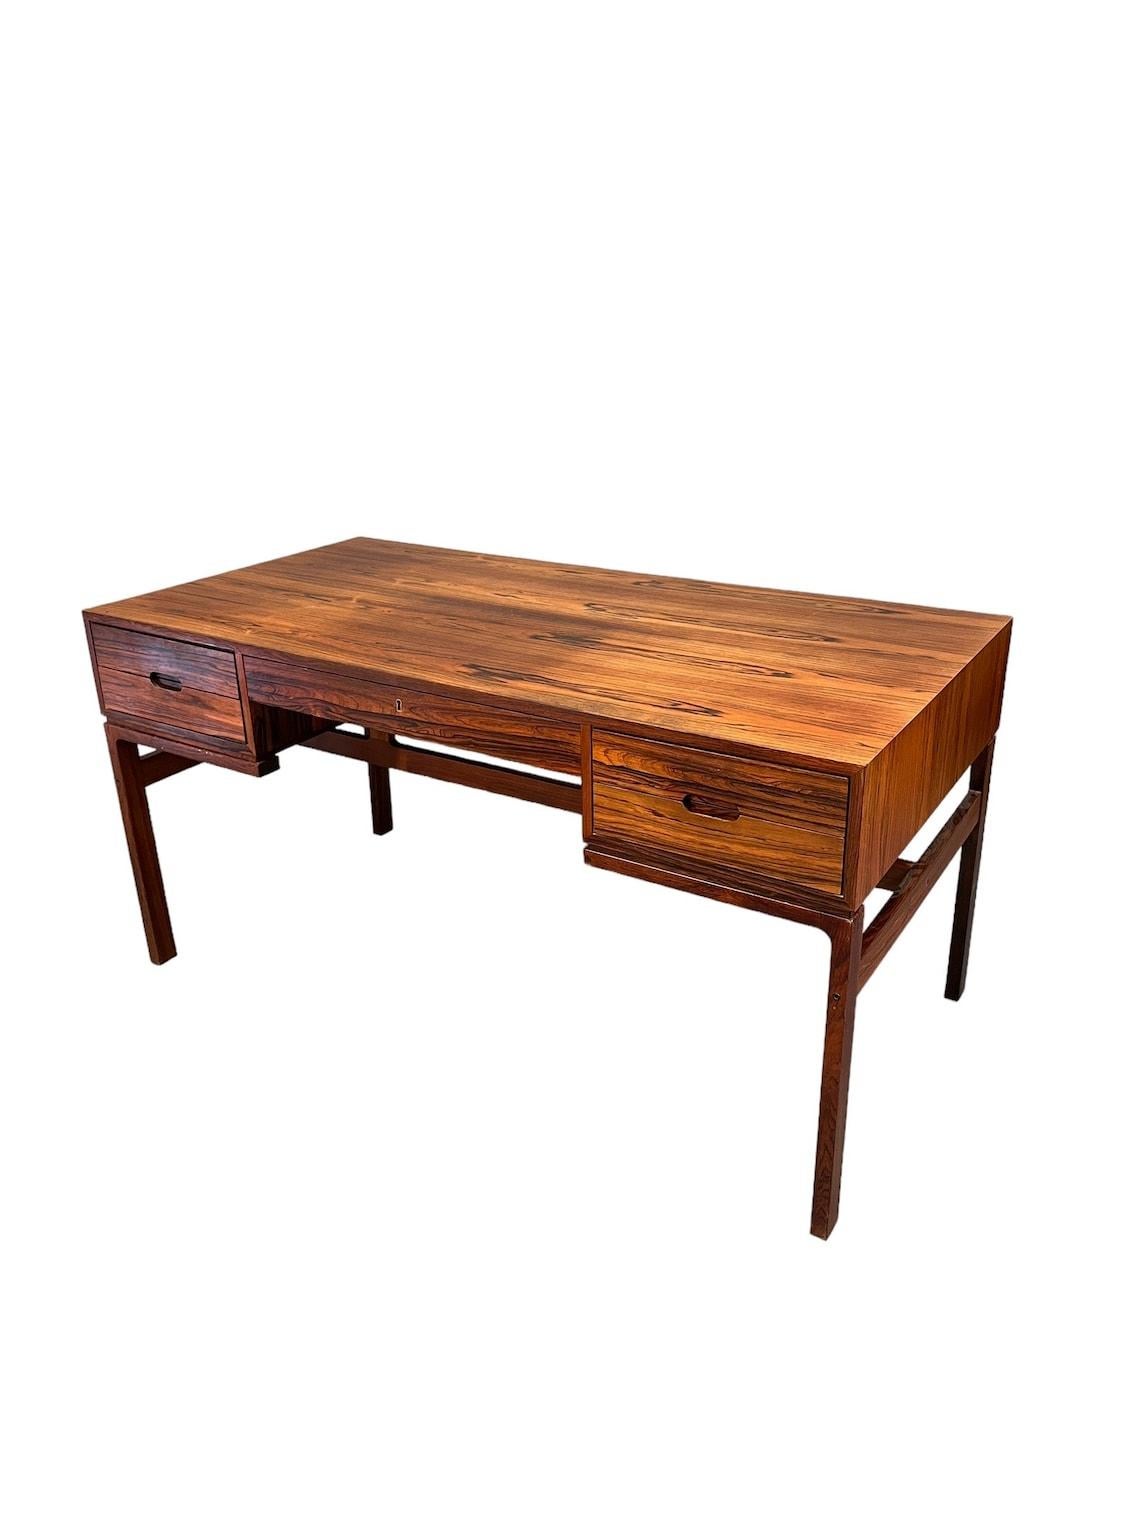 Mid-Century Rosewood Arne wahl Iversen writing desk

Dimensions:
56” w x 28” d x 29” inches

This beautiful mid-century desk is made from high quality rosewood and features a stunning natural finish. With its elegant brown color and sleek design,